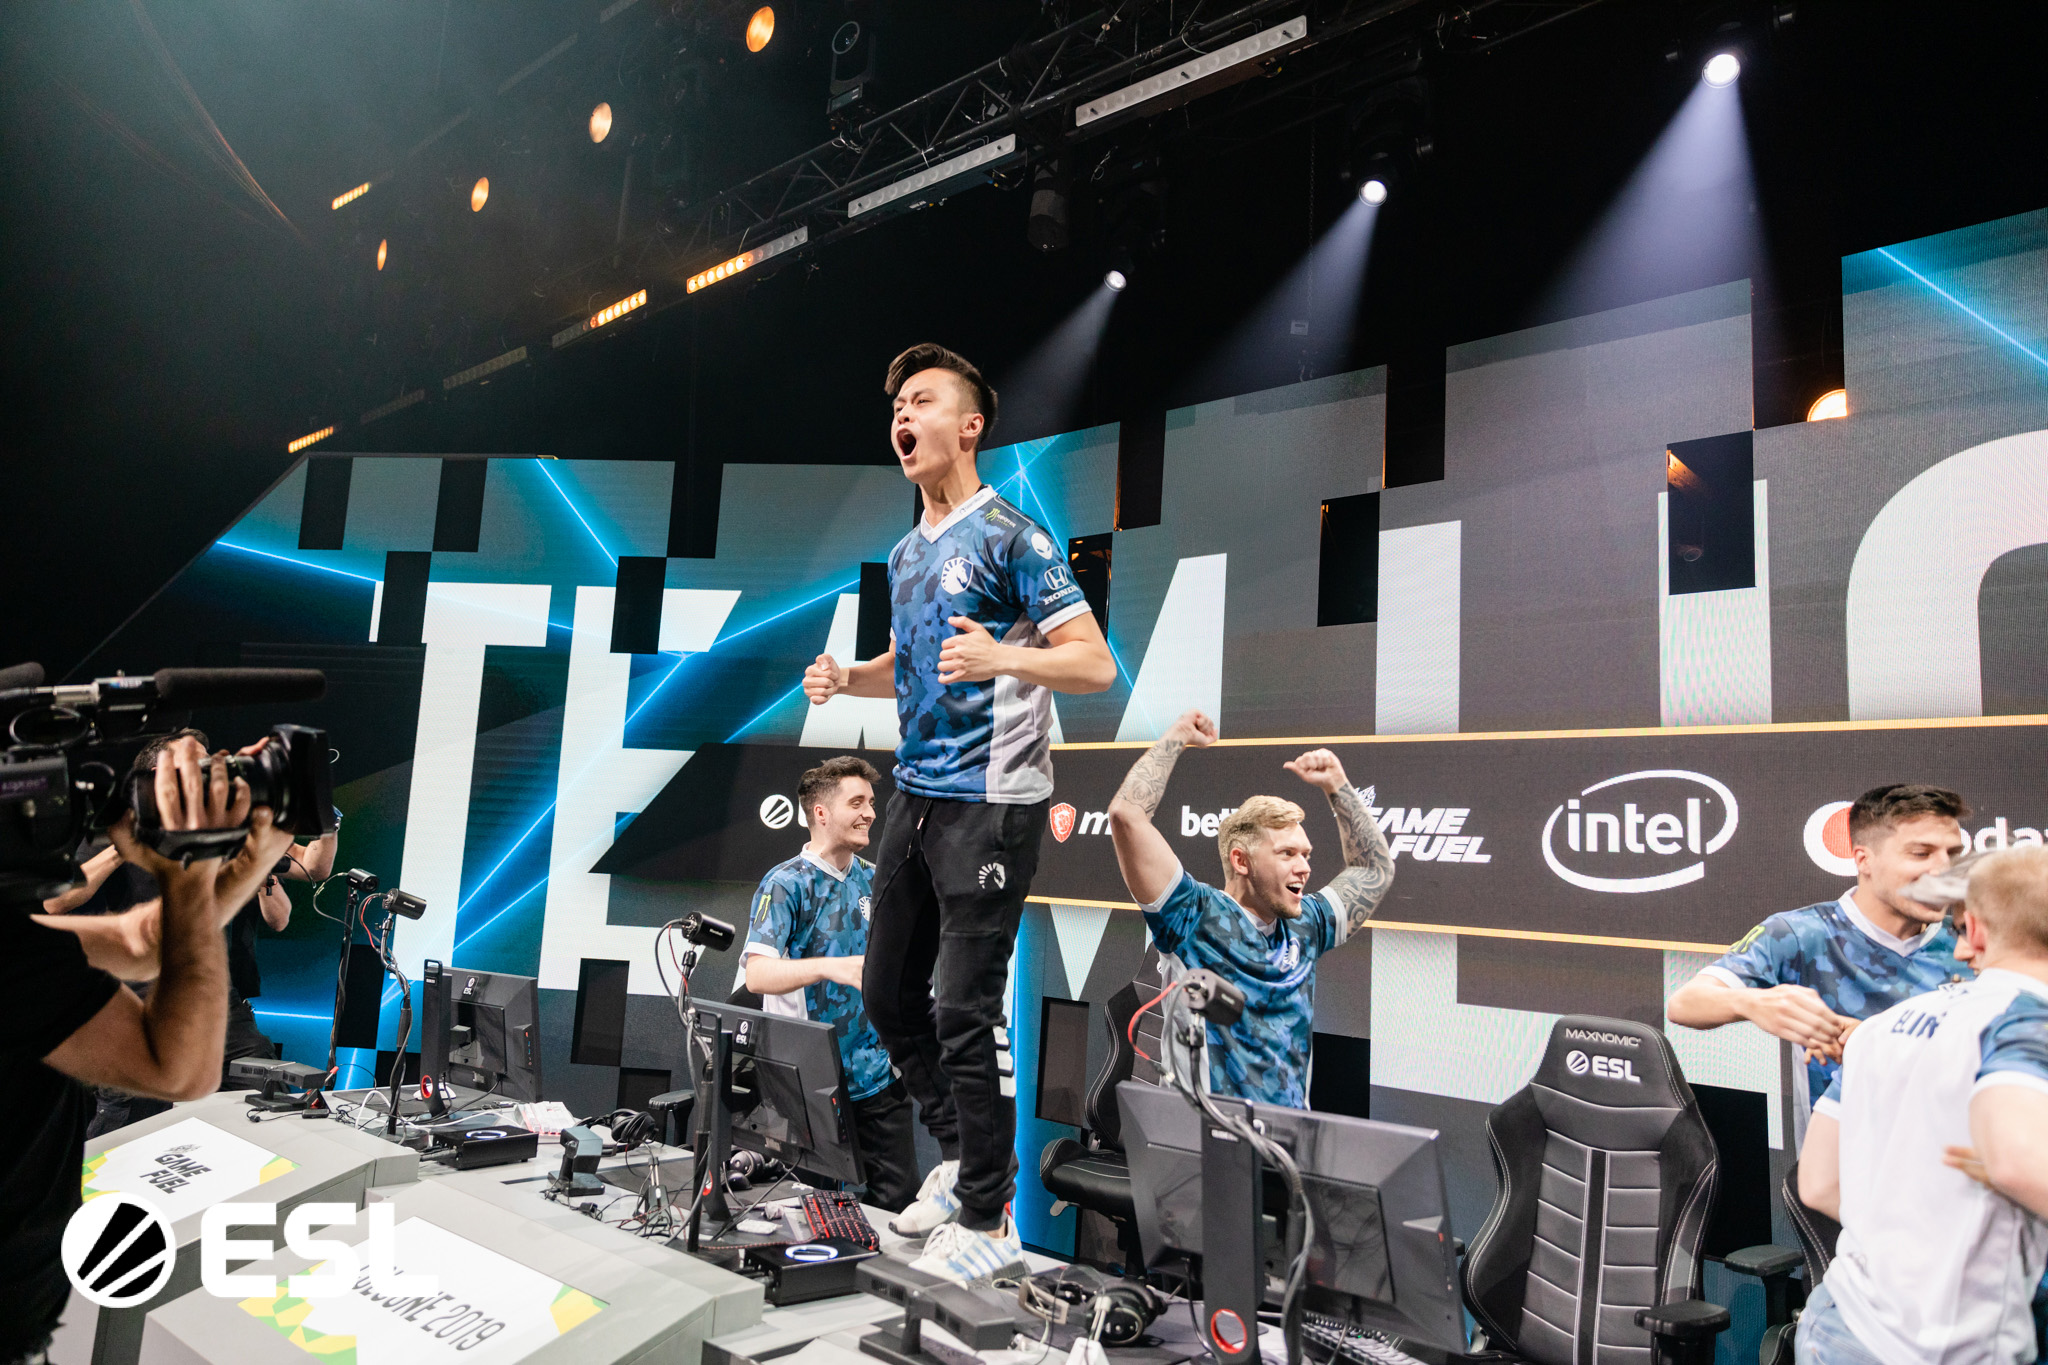 Jacky “Stewie2k” Yip pops off after winning ESL Cologne 2019 with Team Liquid. With this victory, Liquid became one of only three teams to earn the prestige of winning the $1 million Intel Grand Slam.